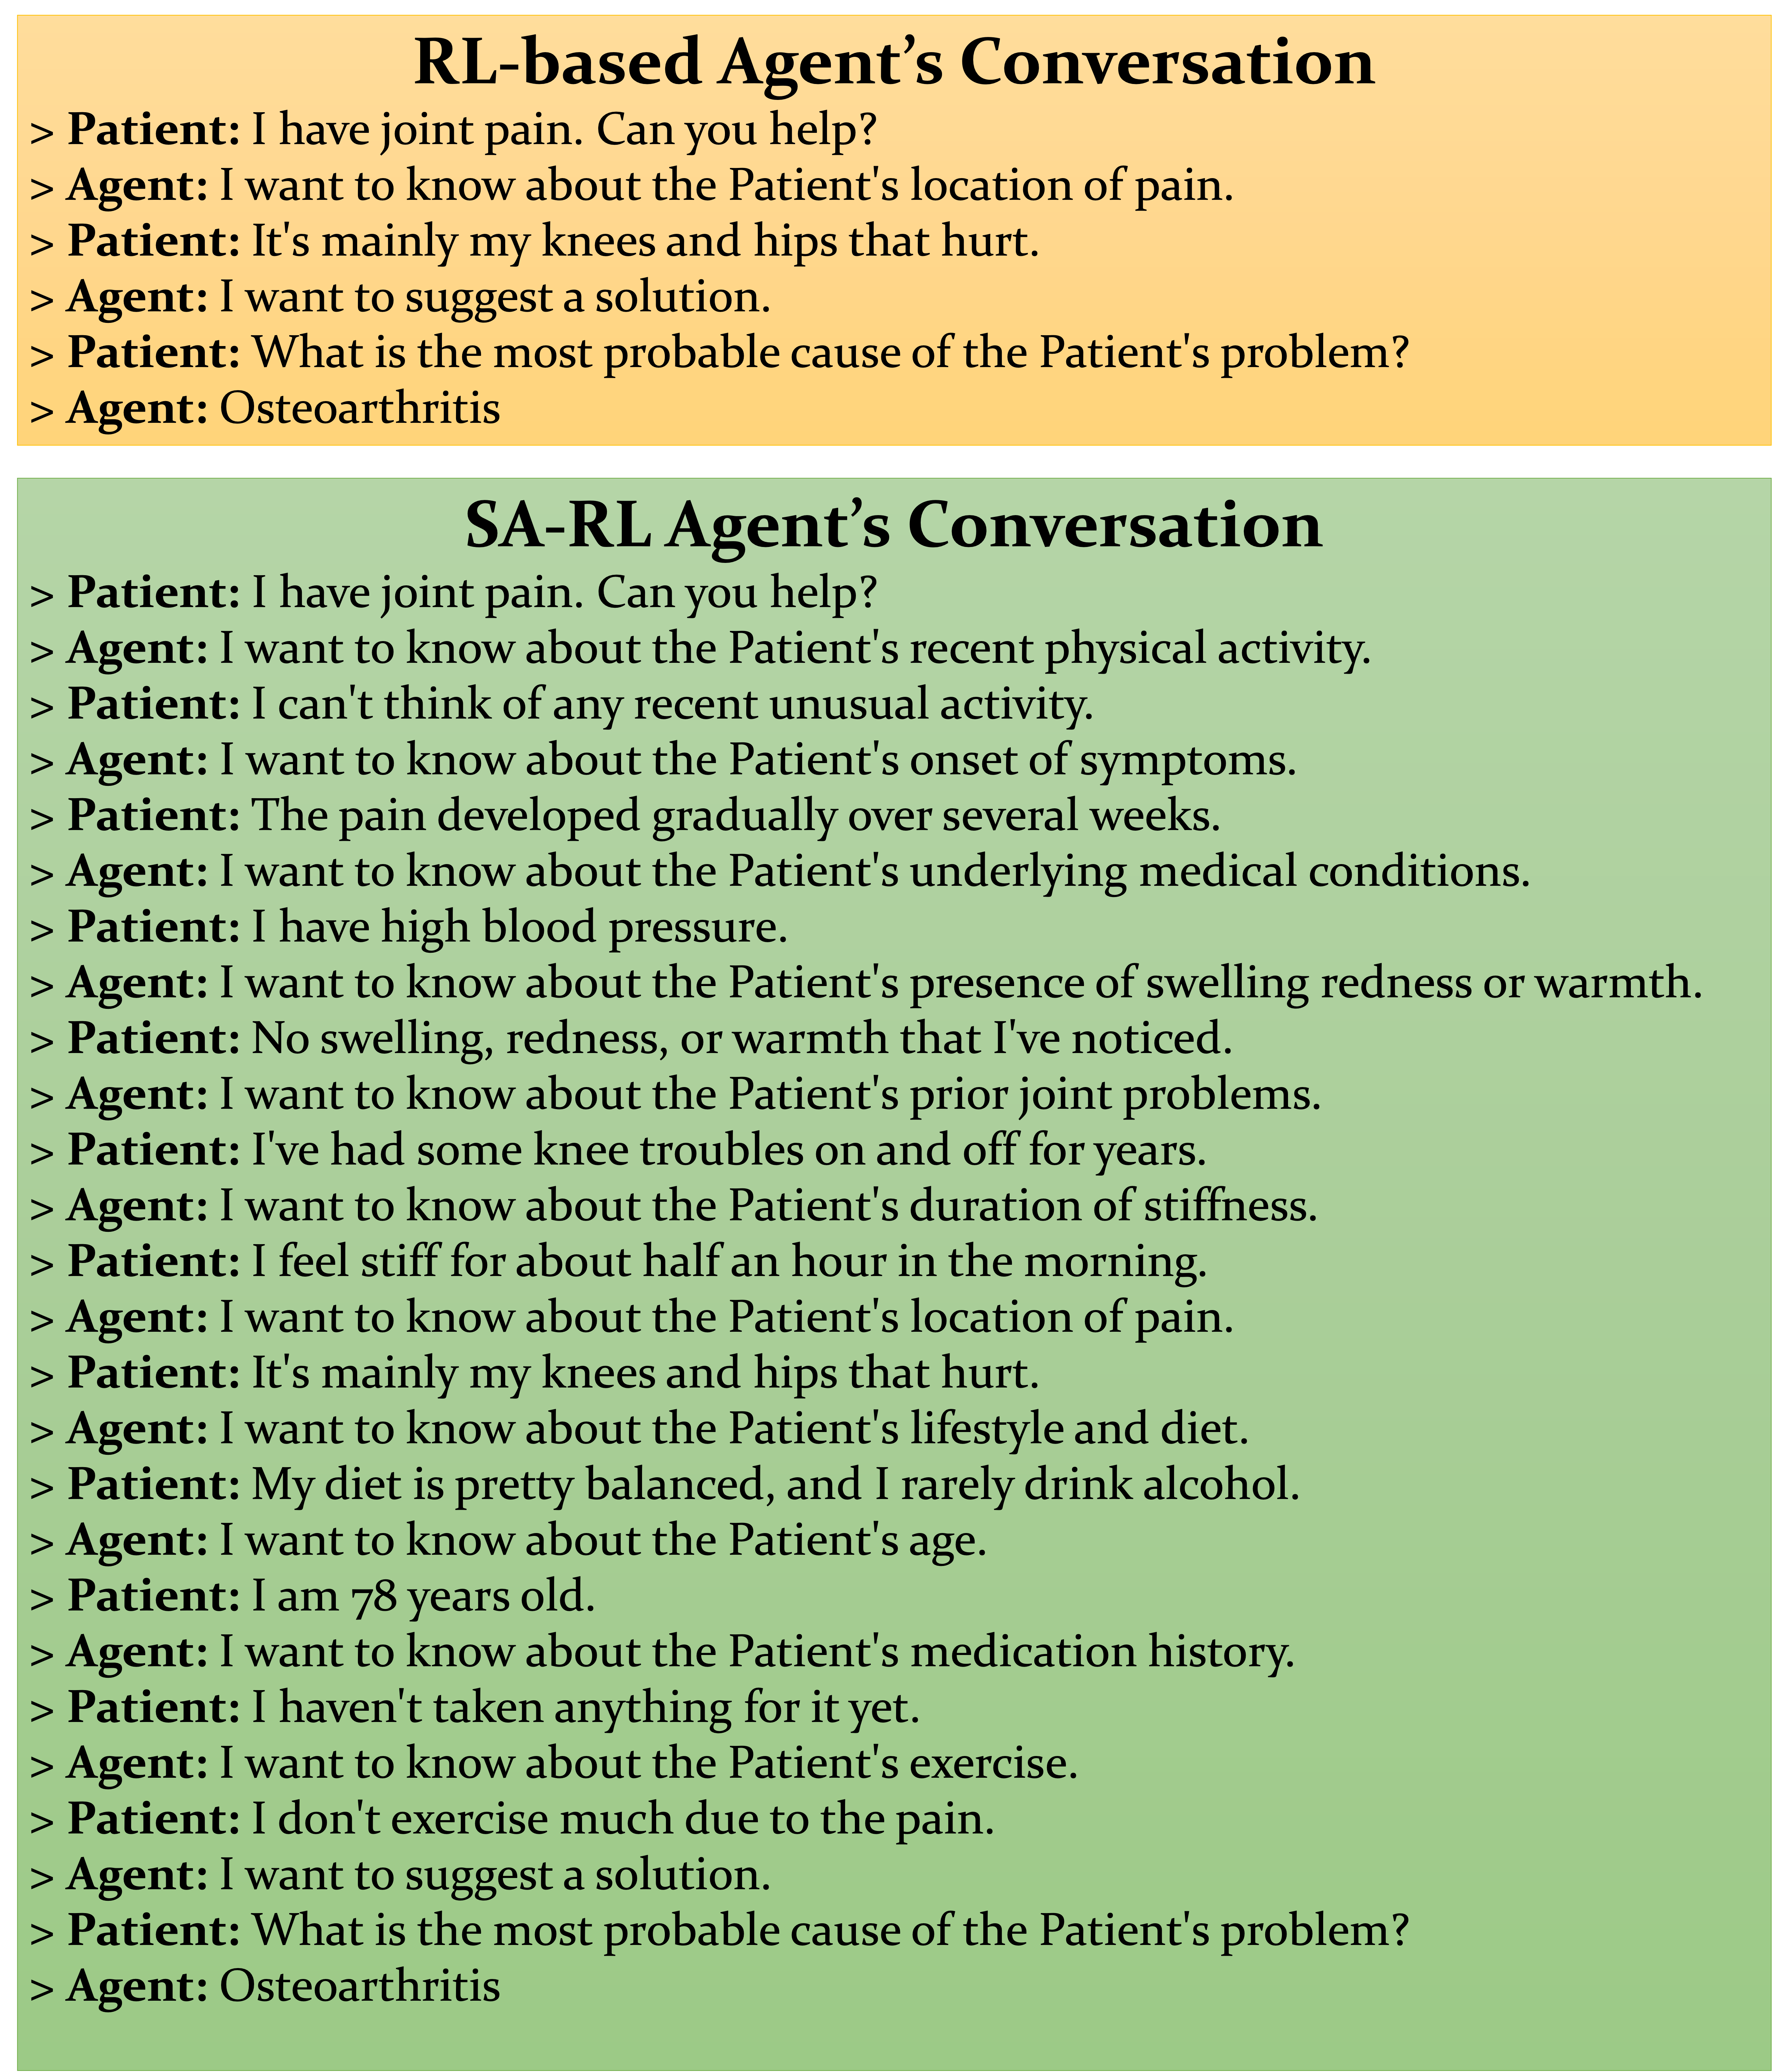 Example diagnostic conversations with the patient with joint pains in a test subtask with Osteoarthritis as the most probable cause.
    RL-based Agent’s Conversation and
SA-RL Agent’s Conversation
